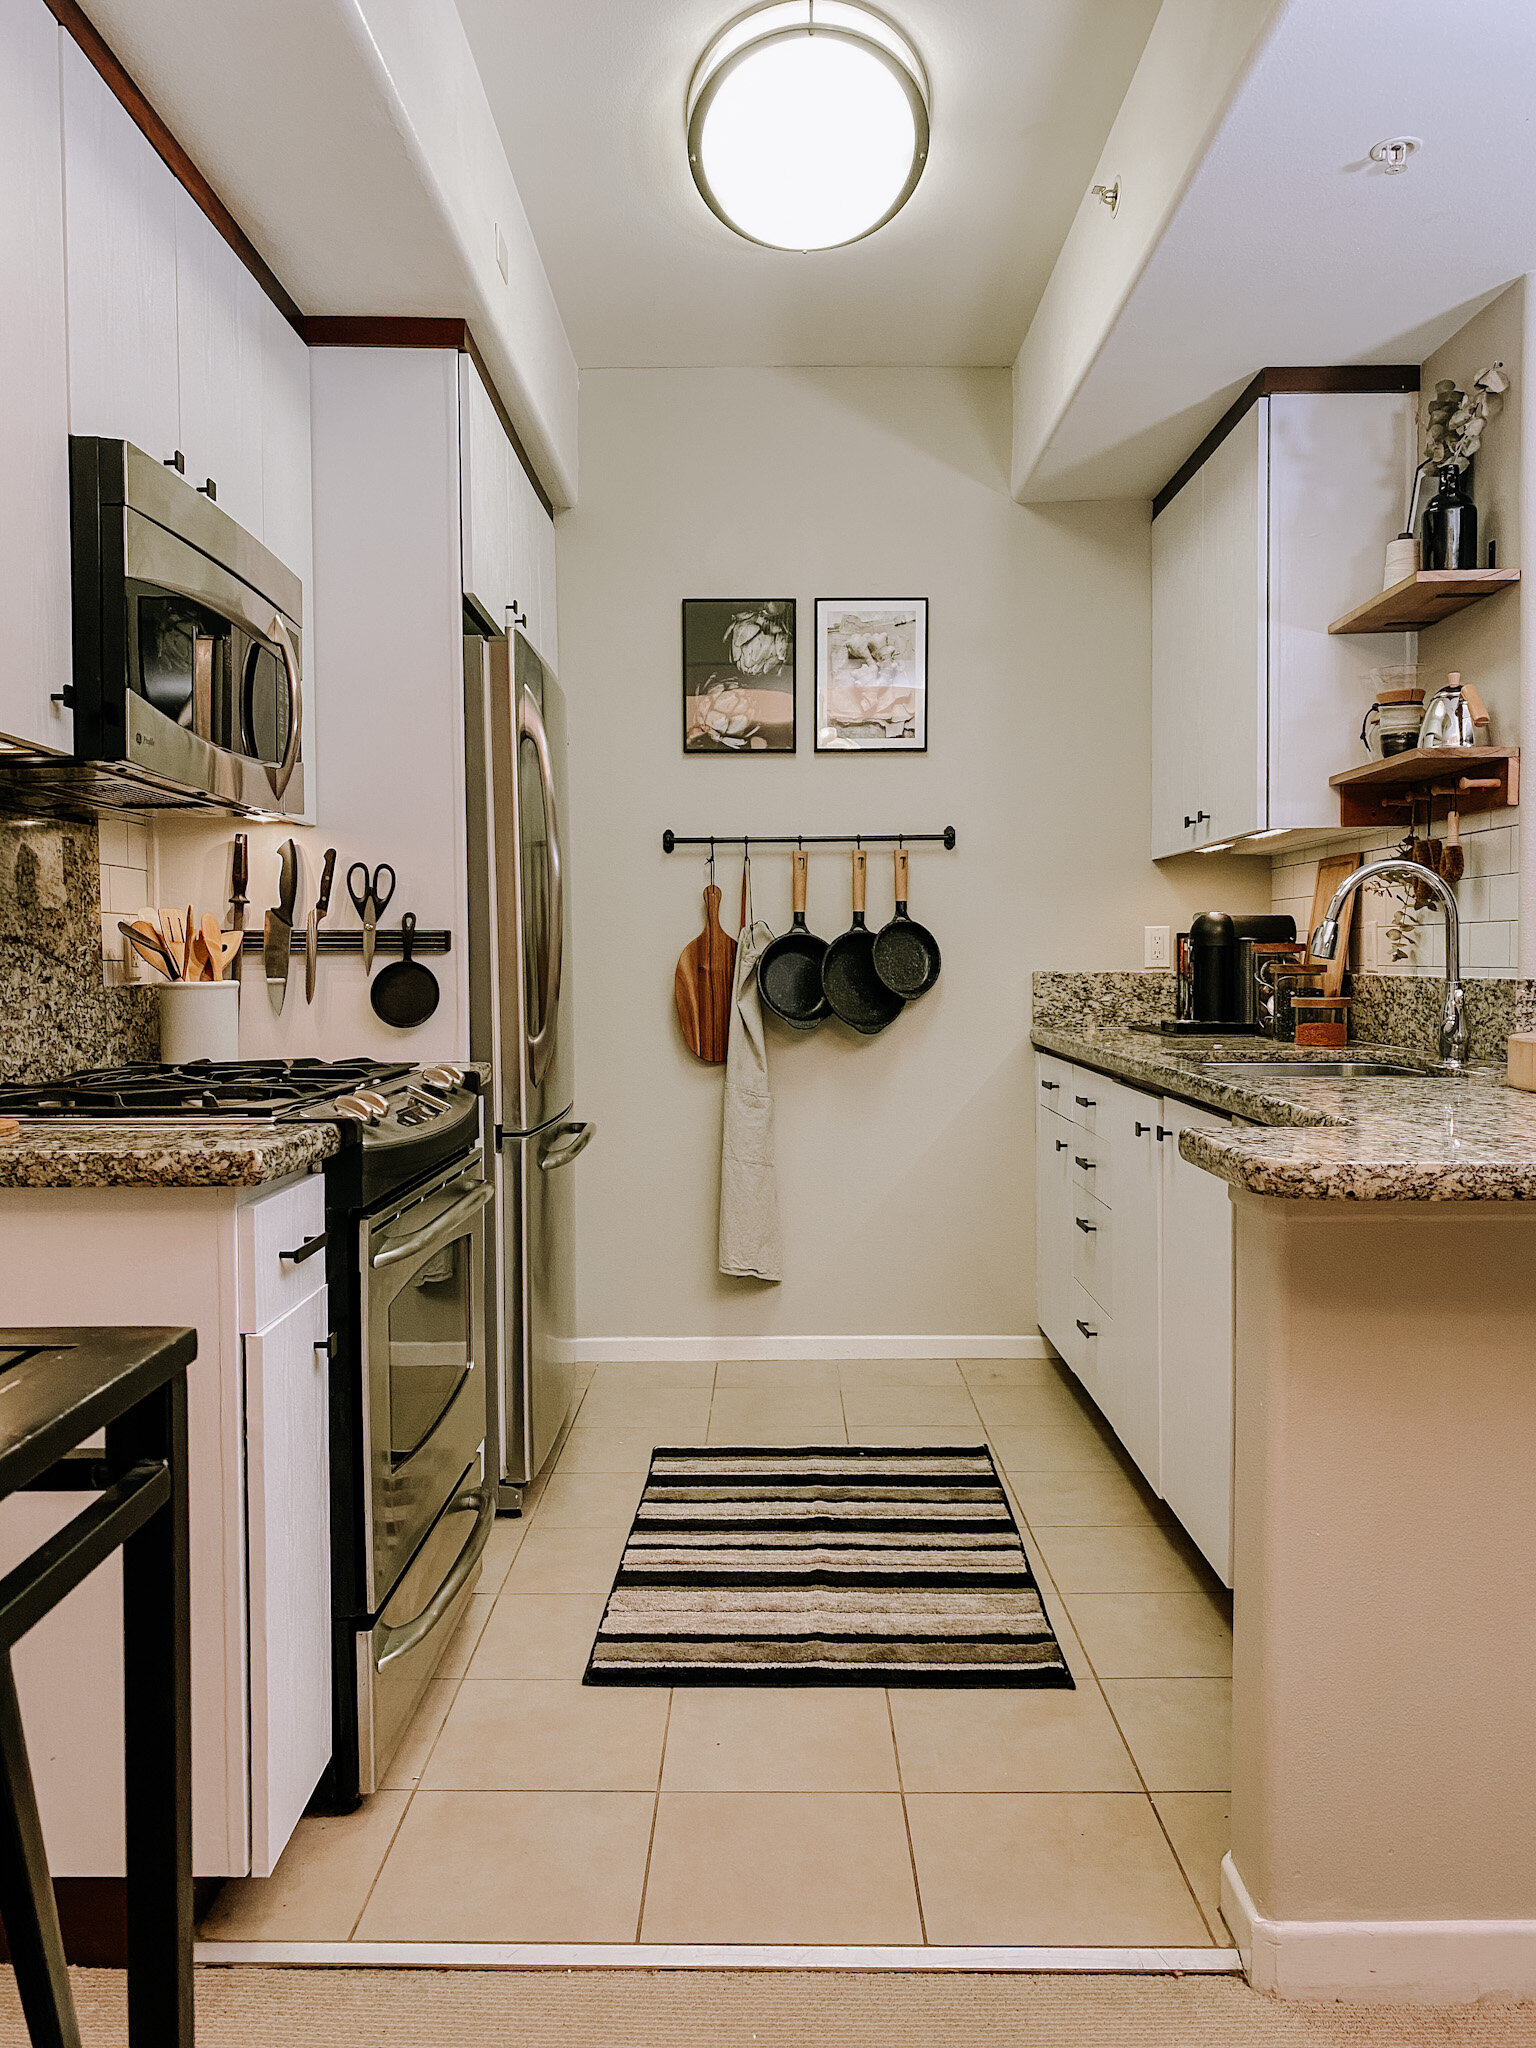 10 Cheap, Renter-Friendly Improvements for Small Kitchens